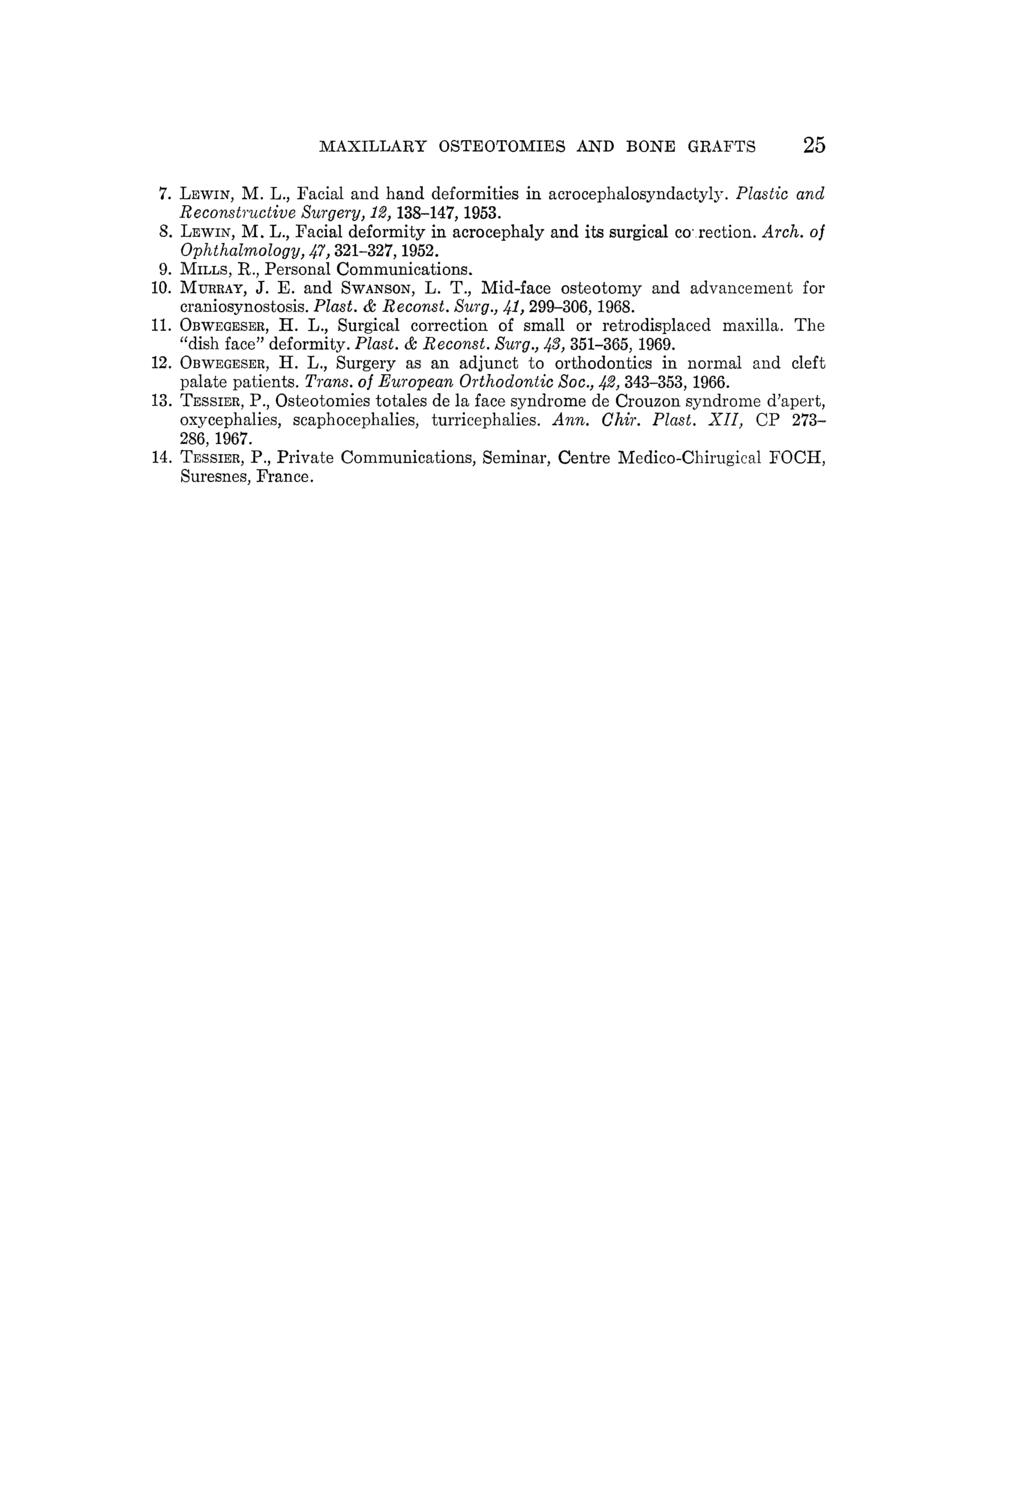 MAXILLARY OSTEOTOMIES AND BONE GRAFTS 25. Lewin, M. L., Facial and hand deformities in acrocephalosyndactyly. Plastic and Reconstructive Surgery, 12, 188-147, 1953.. Lewin, M. L., Facial deformity in acrocephaly and its surgical co' rection.